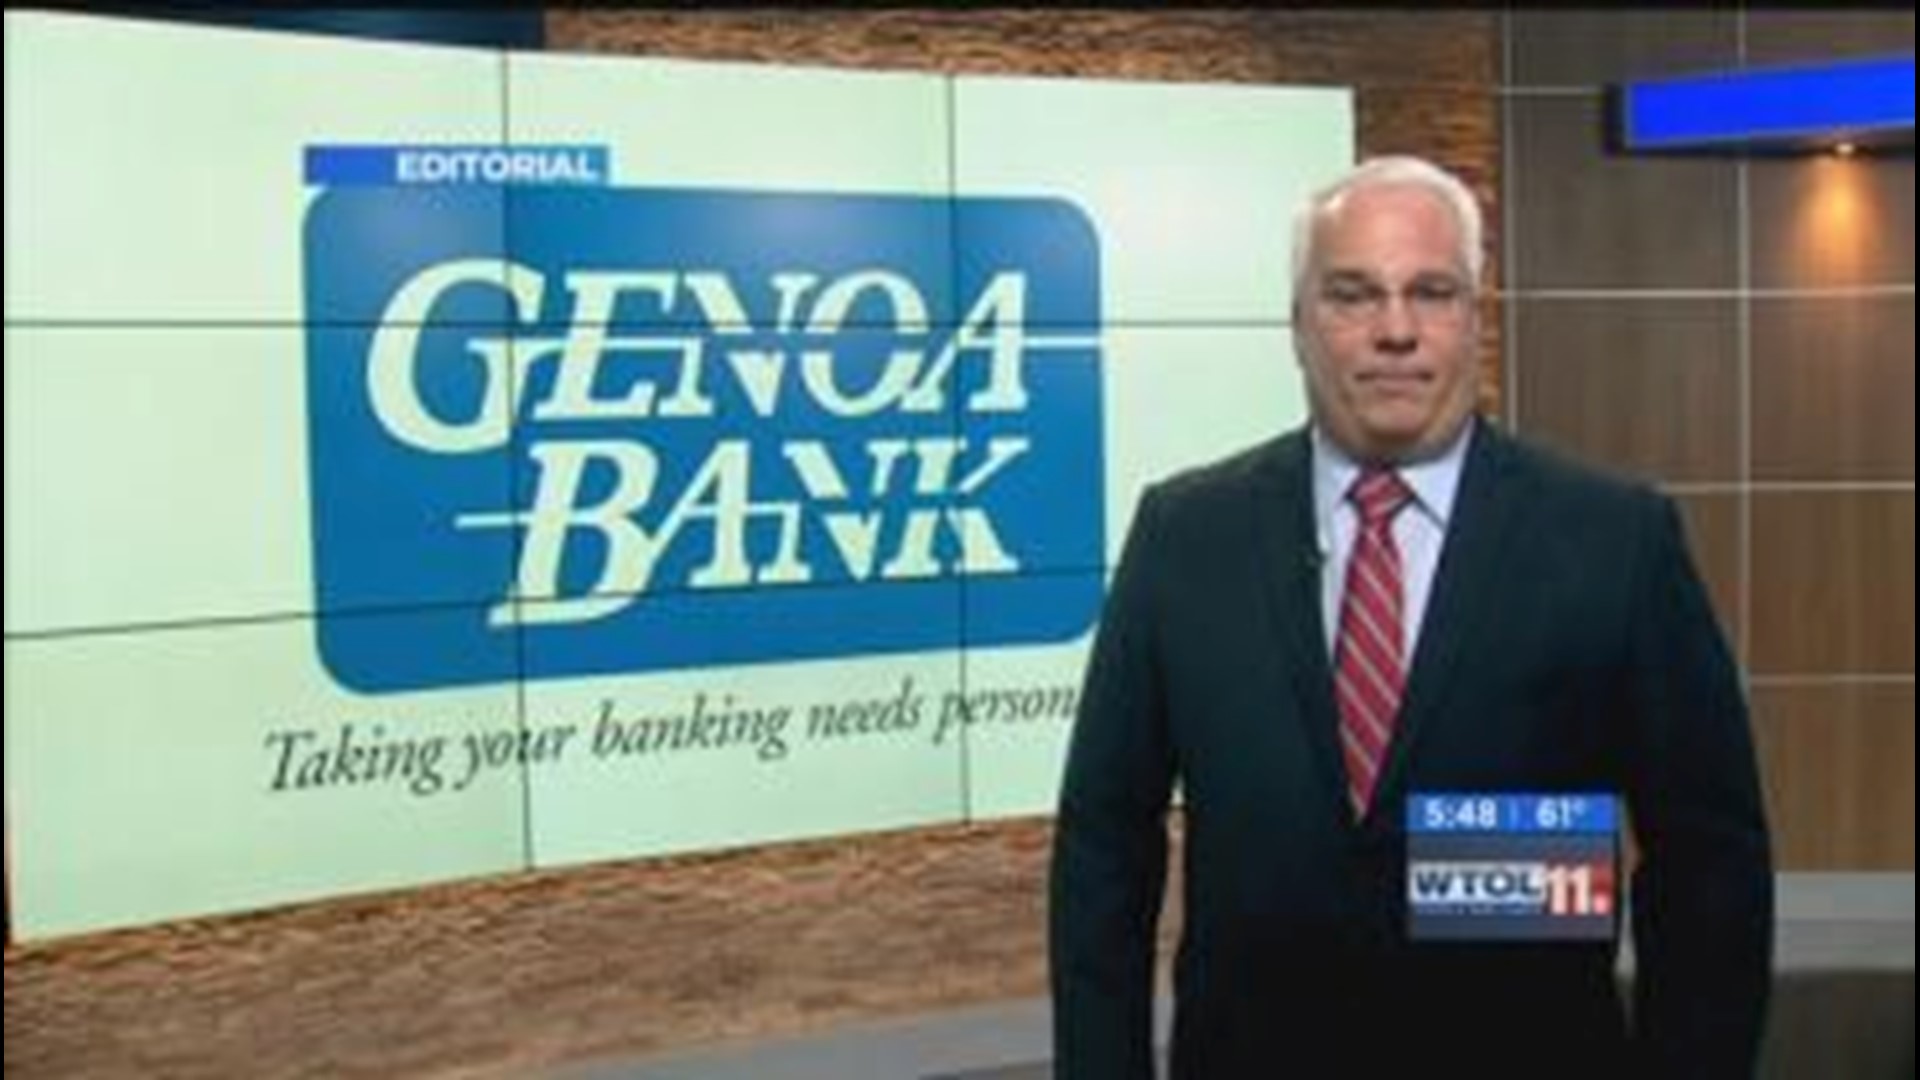 Guest Editorial: GenoaBank supports local businesses